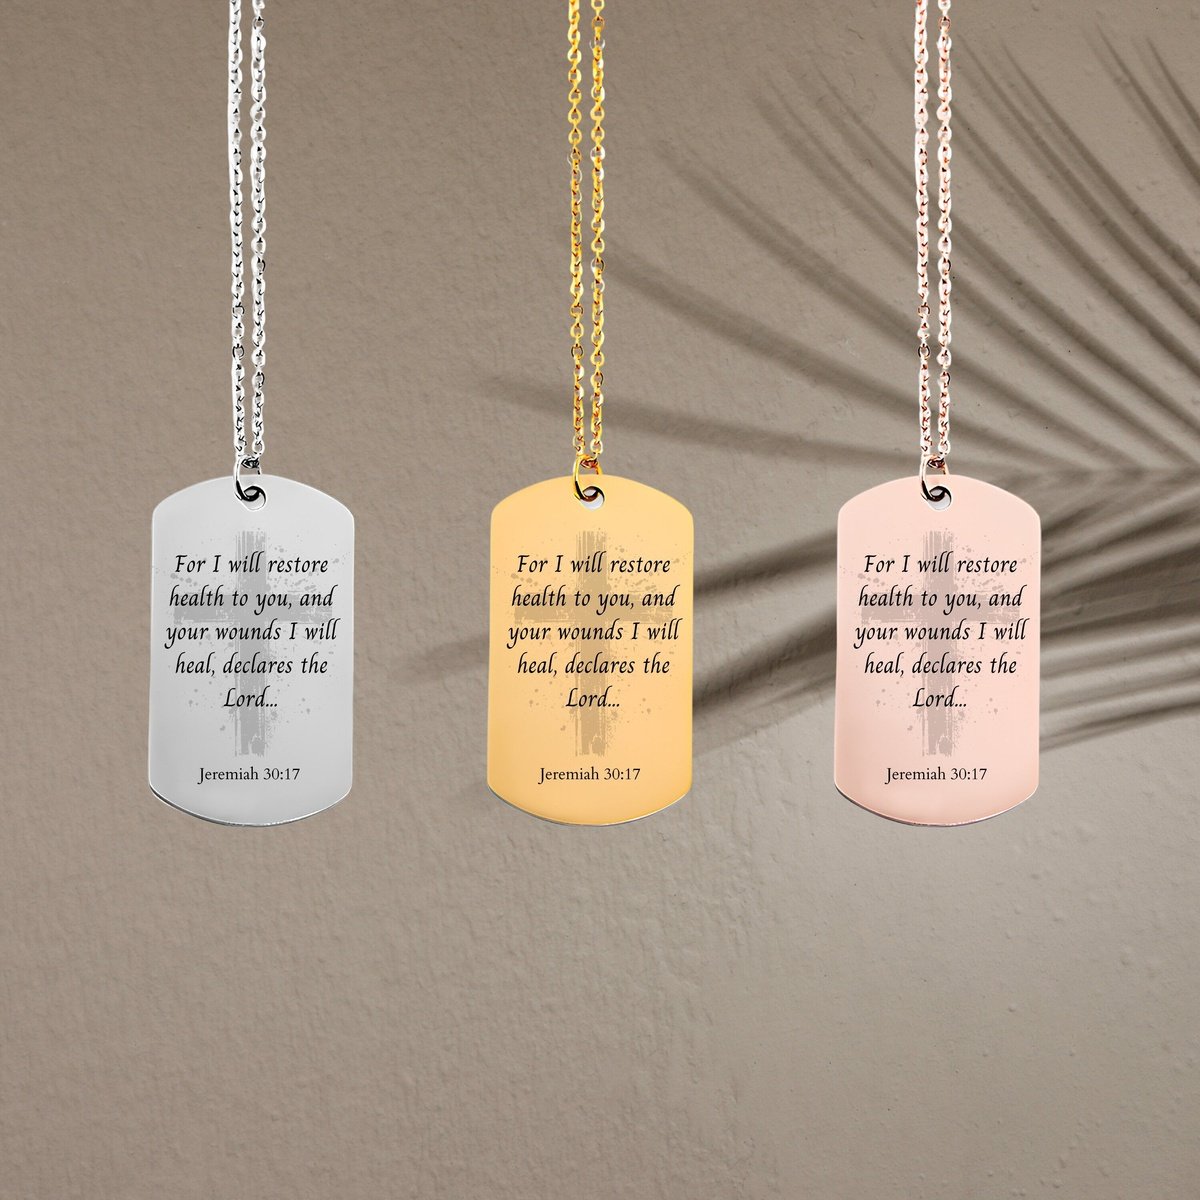 Jeremiah 30 17 quote necklace, gold bible verse, 14k gold cross charm necklace, confirmation gift, gold bar tag necklace,religious scripture